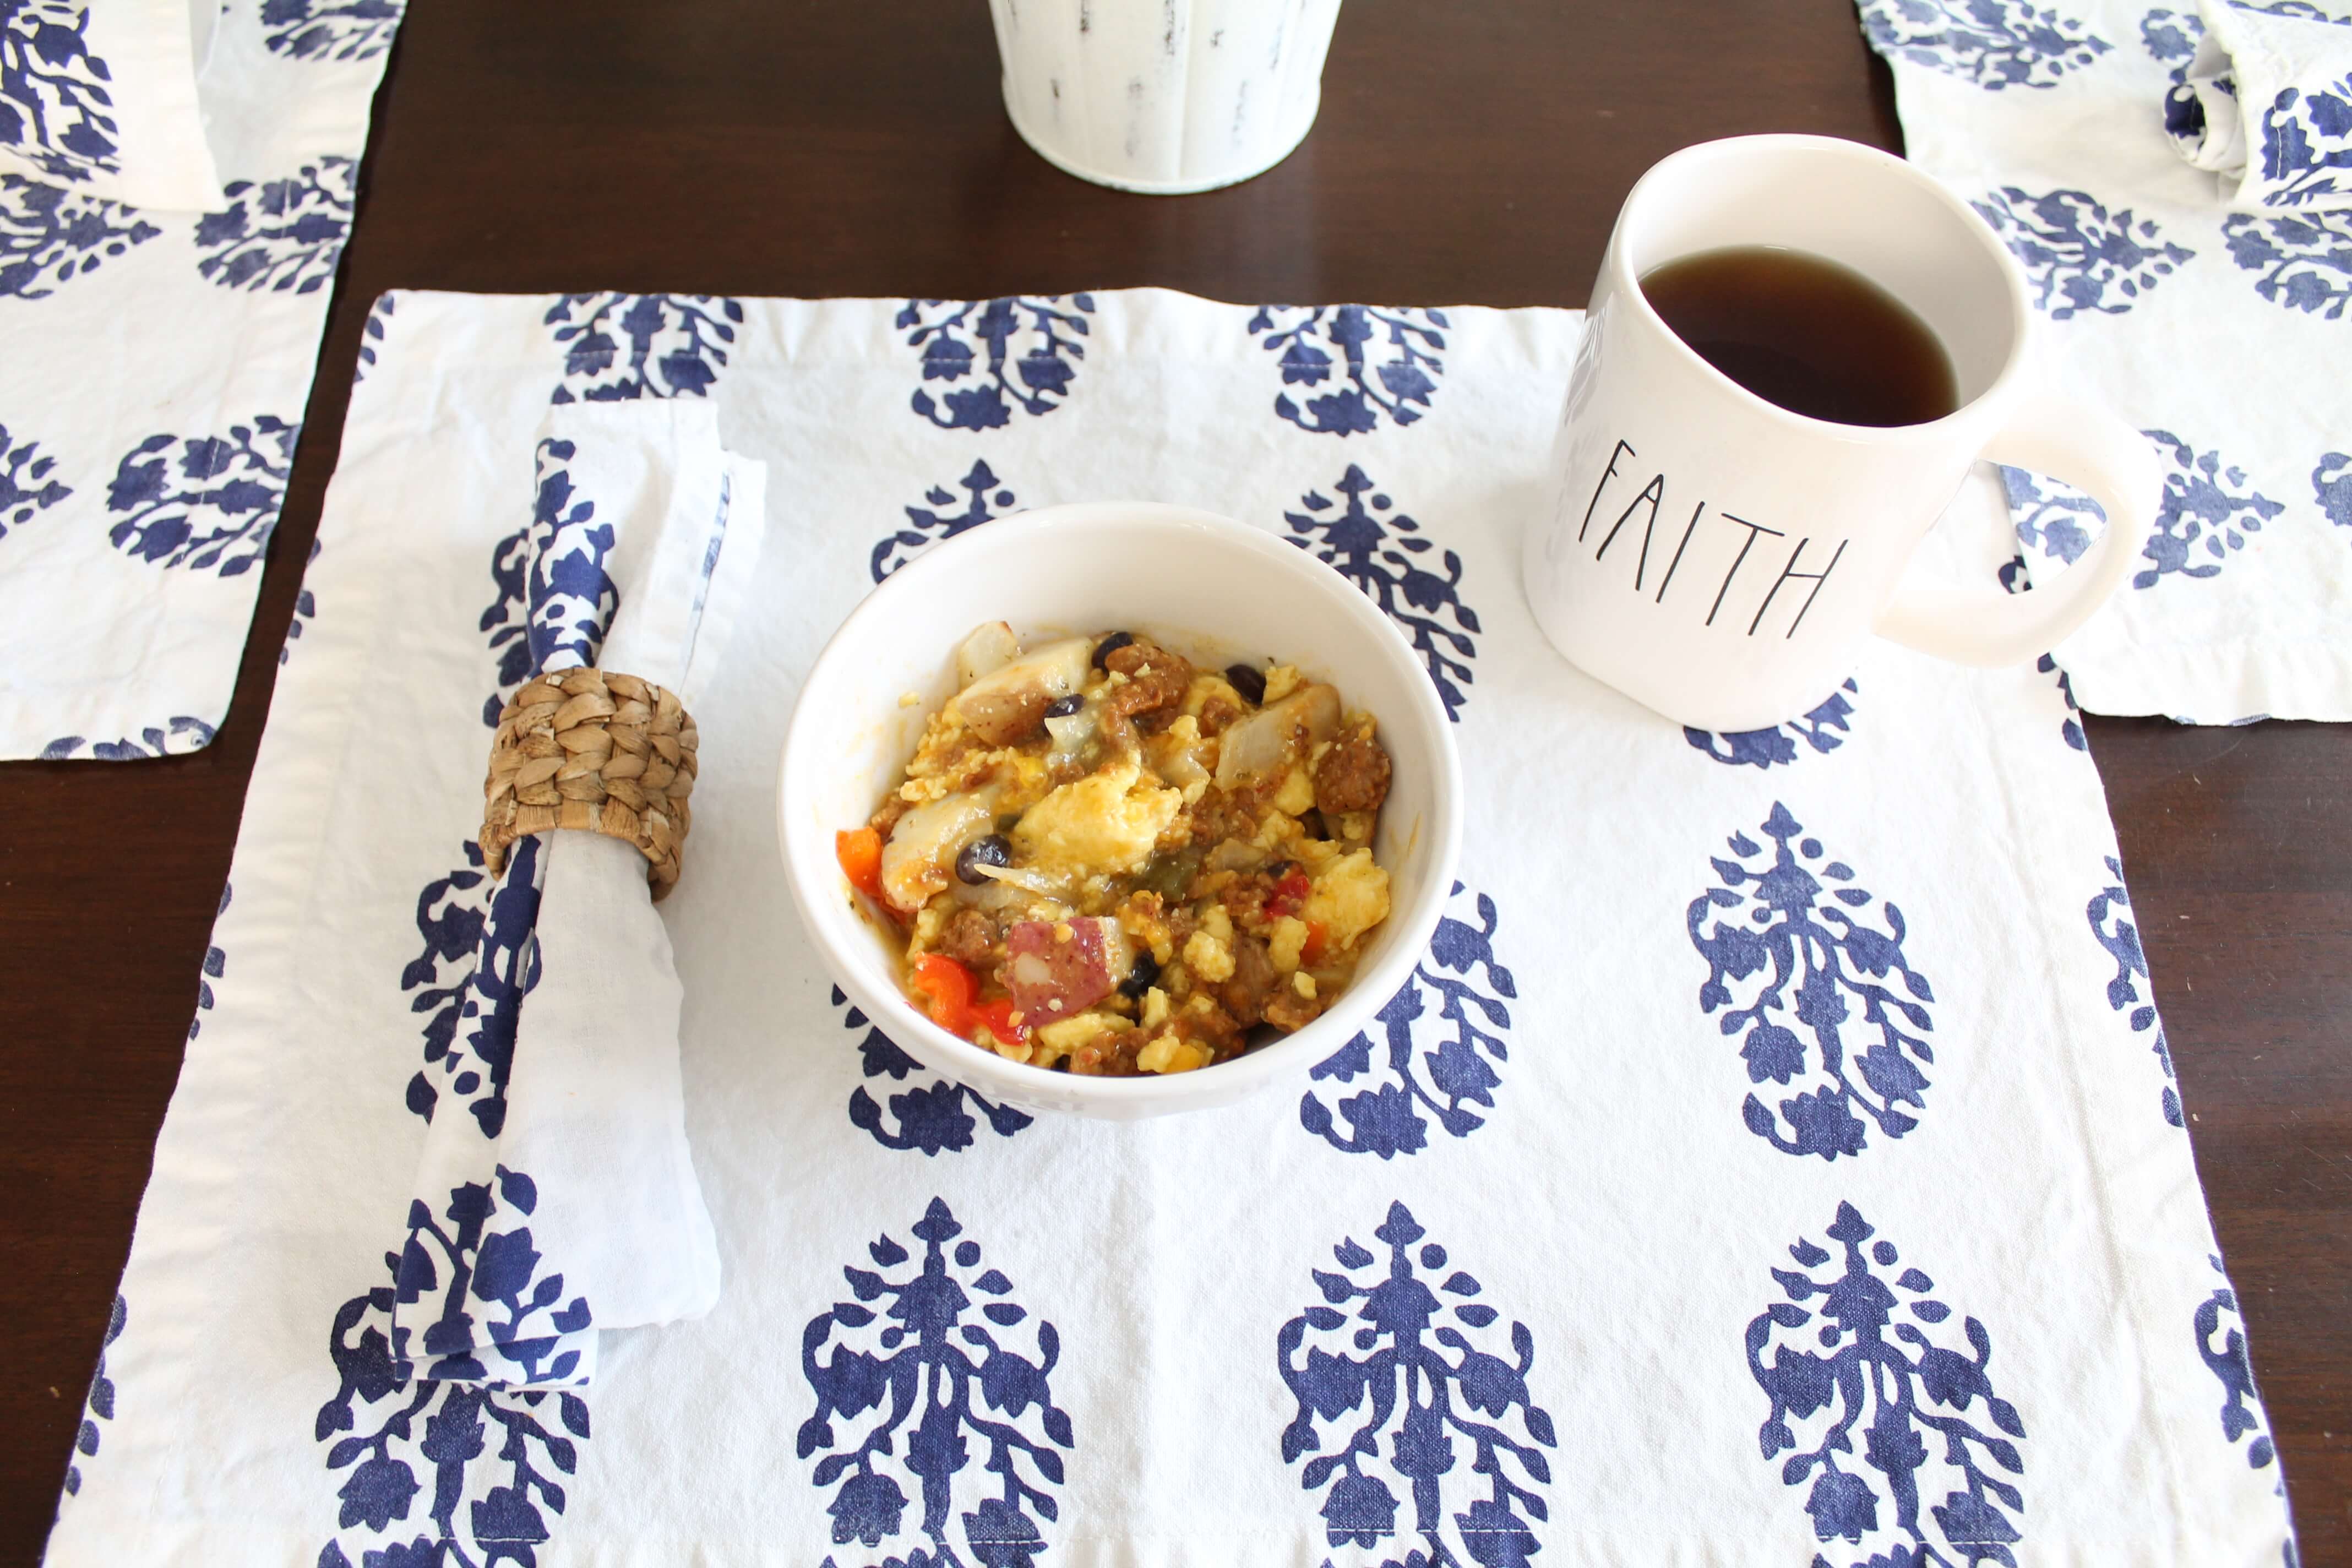 7 ways to be a better stay at home mom. Great tips we all know but need to be reminded of, including eating! These Jimmy Dean breakfast bowls are delicious and easy! #ad #jimmydeanbowls #sahm